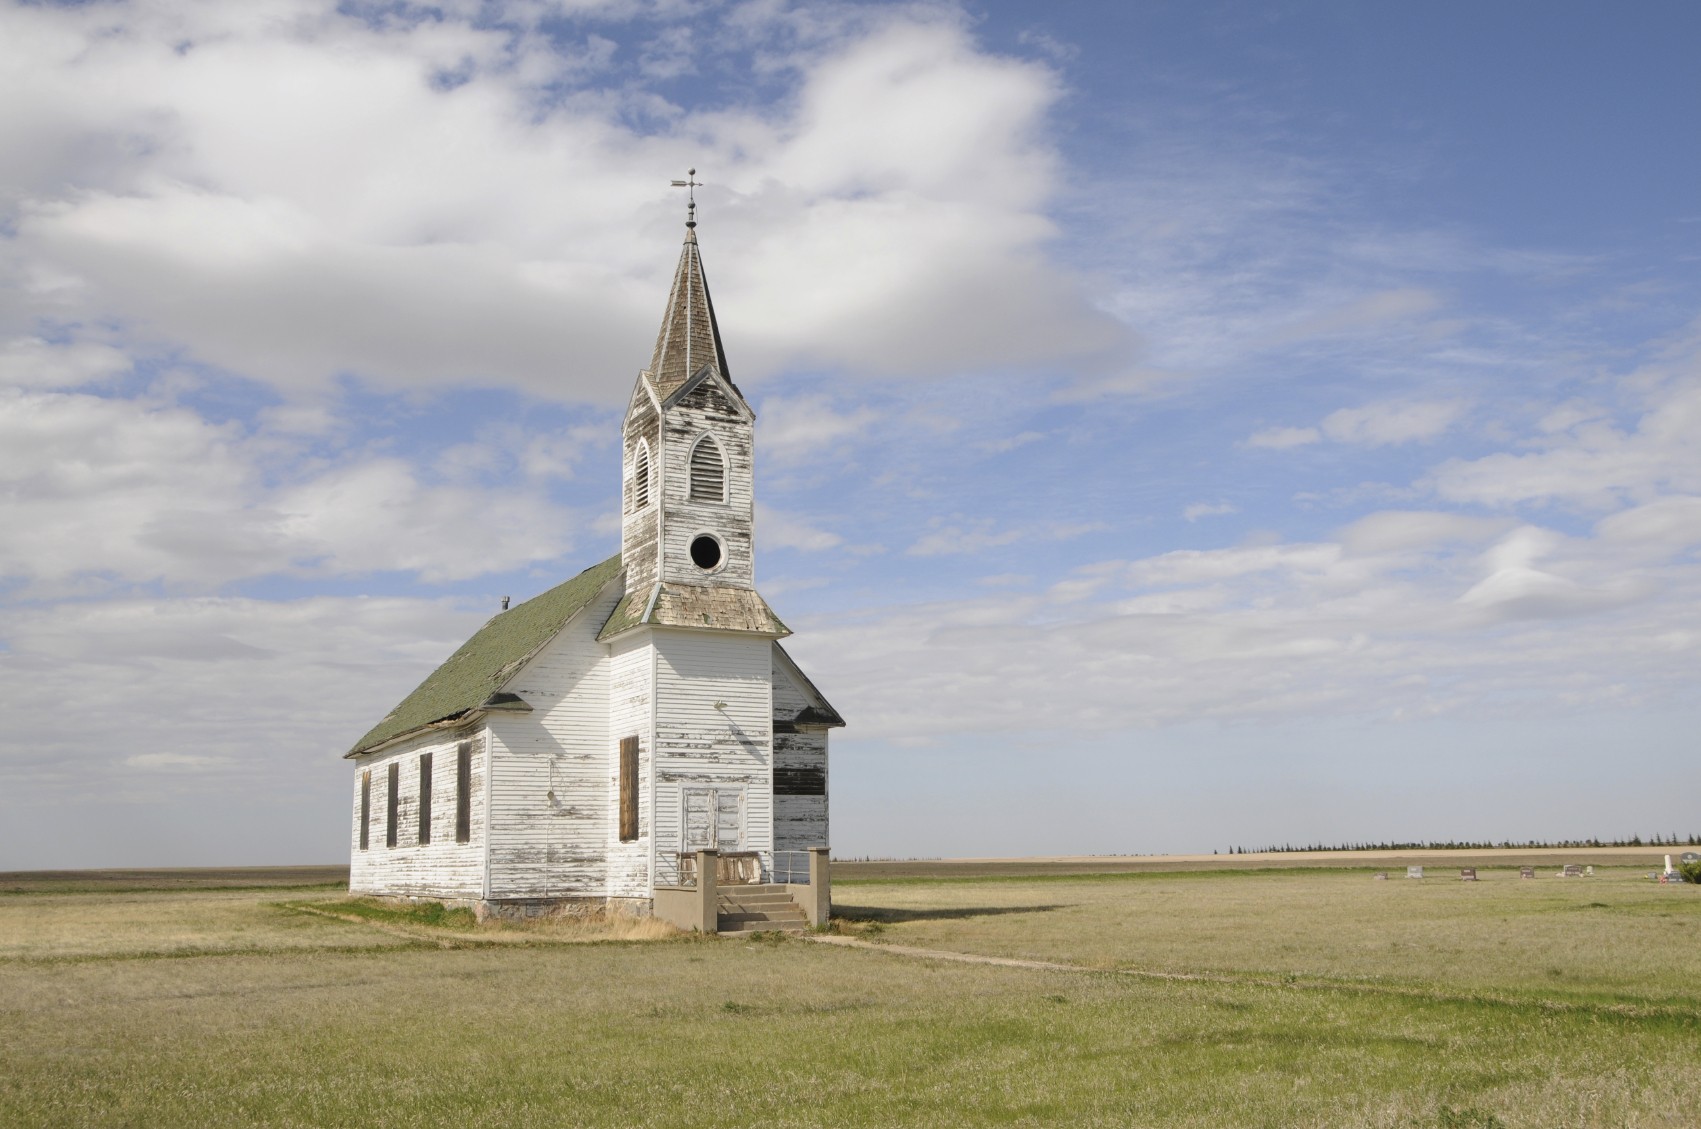 Church Wallpaper Pictures 19038 19598 Hd Wallpapers - Church In The Country - HD Wallpaper 